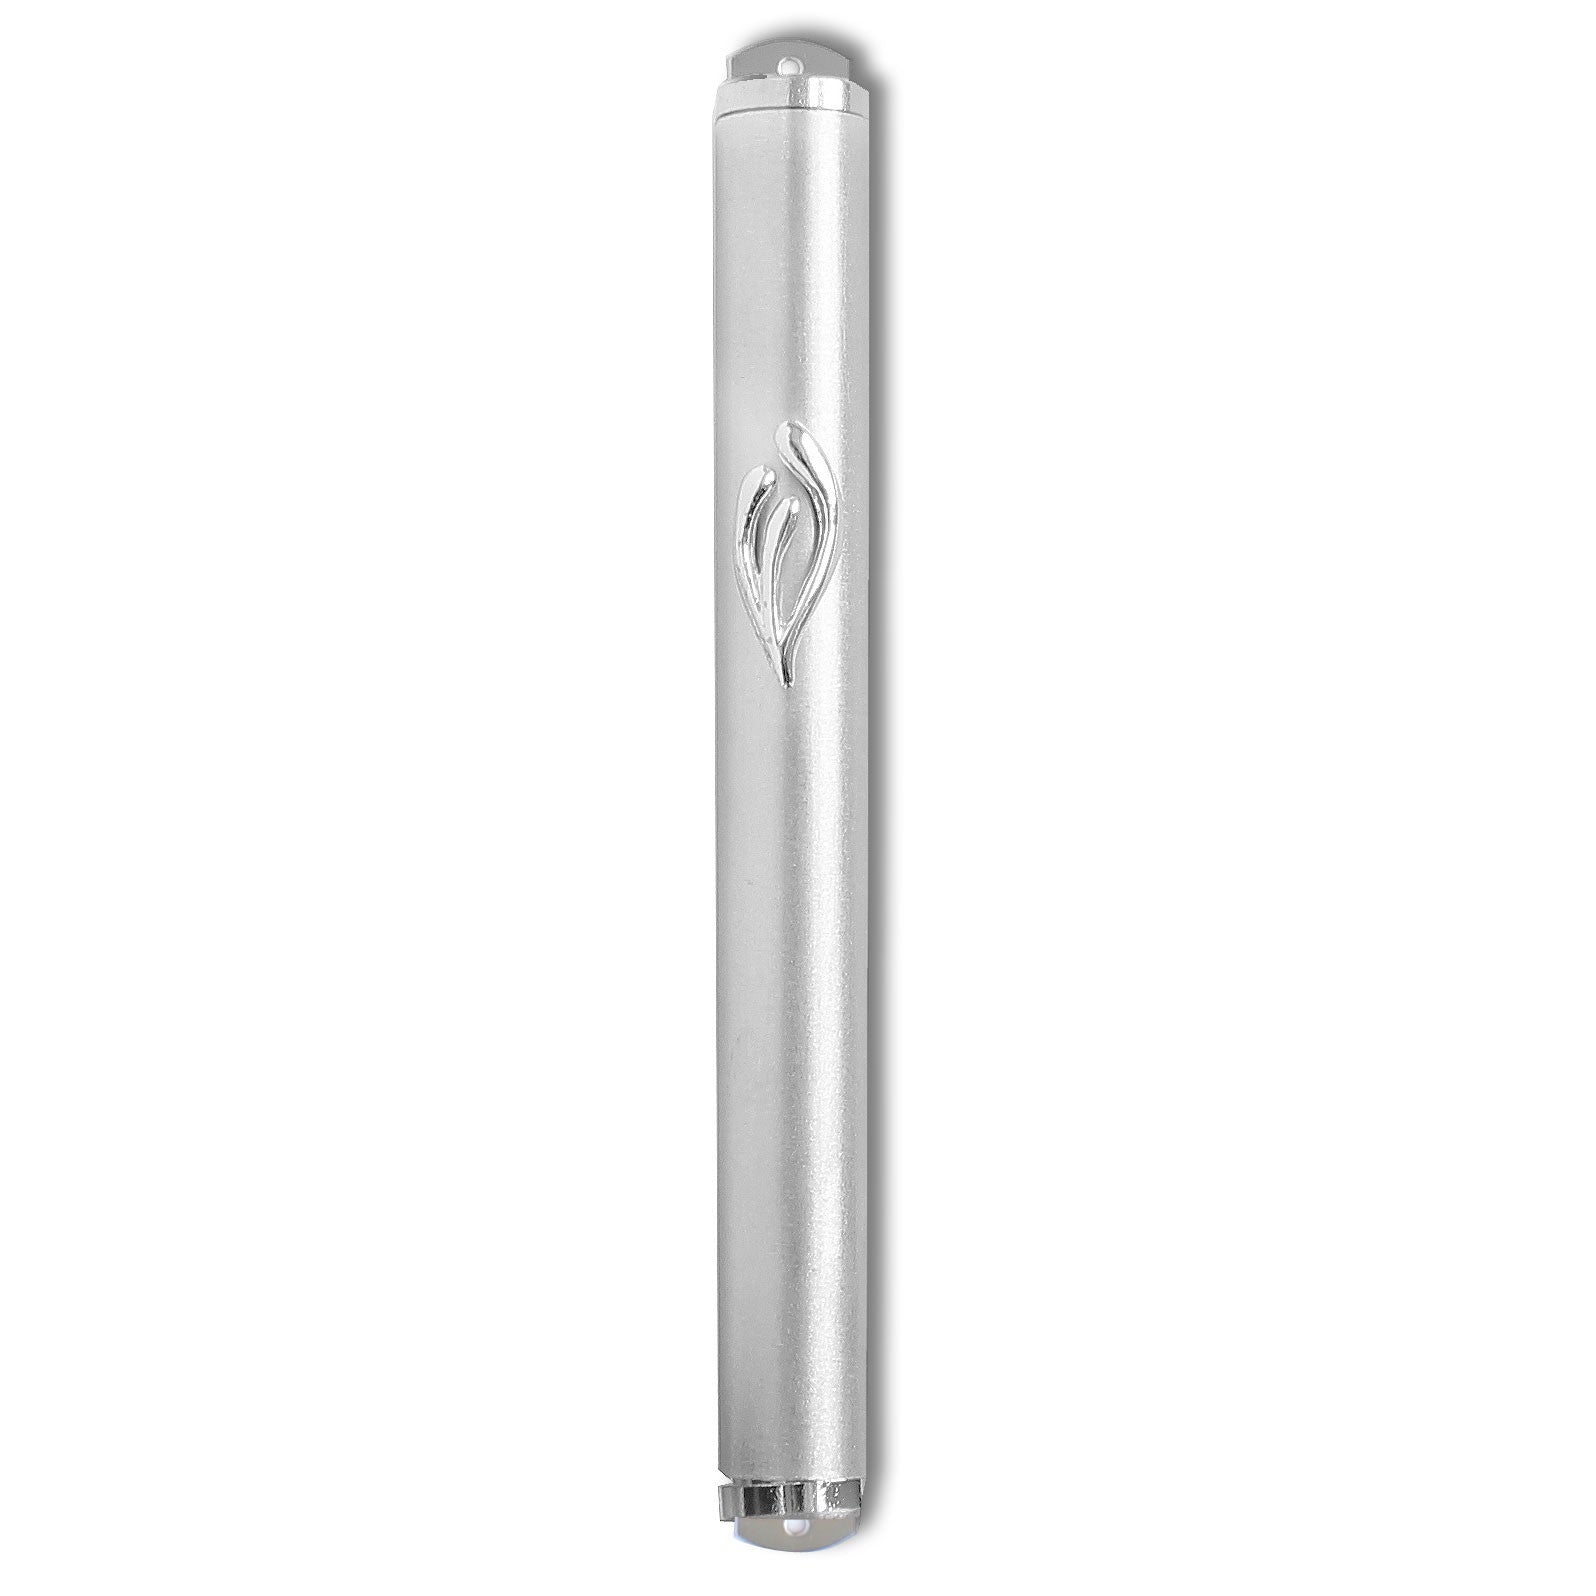 Extra Large 9.5" Mezuzah Case - Silver White Brown Wood - Made in Israel